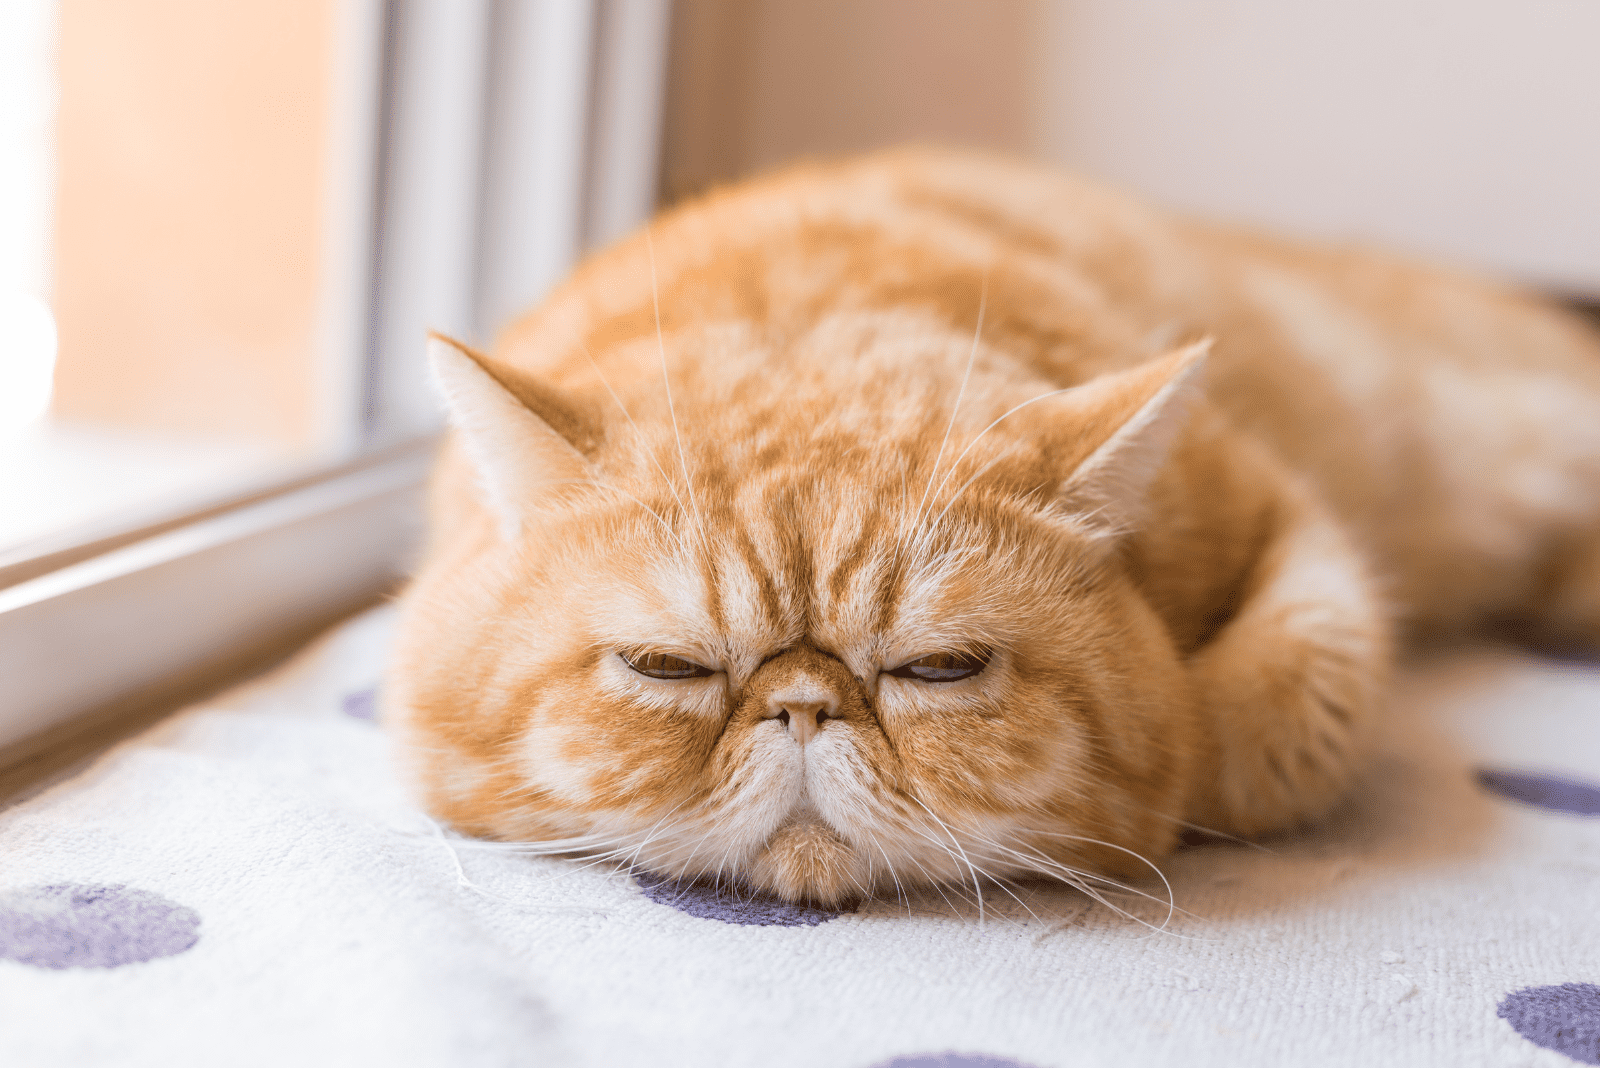 Exotic Shorthair is lying down and resting